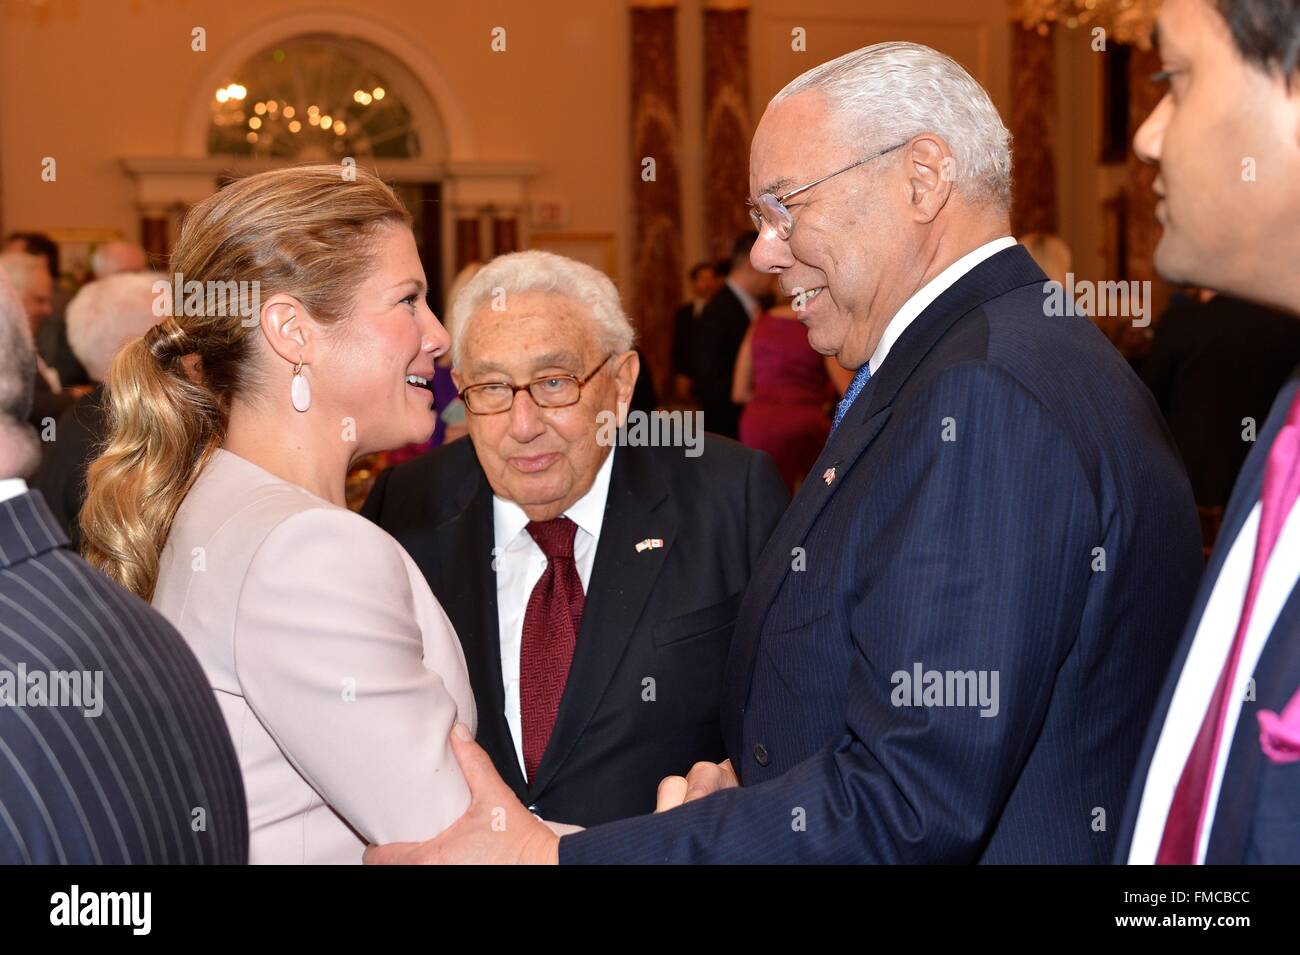 Canadian First Lady Sophie Gregoire Trudeau chats with former U.S. Secretaries of State Colin Powell and Henry Kissinger at a State Luncheon in honor of Canadian Prime Minister Justin Trudeau March 10, 2016 in Washington, DC. This is the first state visit by a Canadian Prime Minister in 20-years. Stock Photo